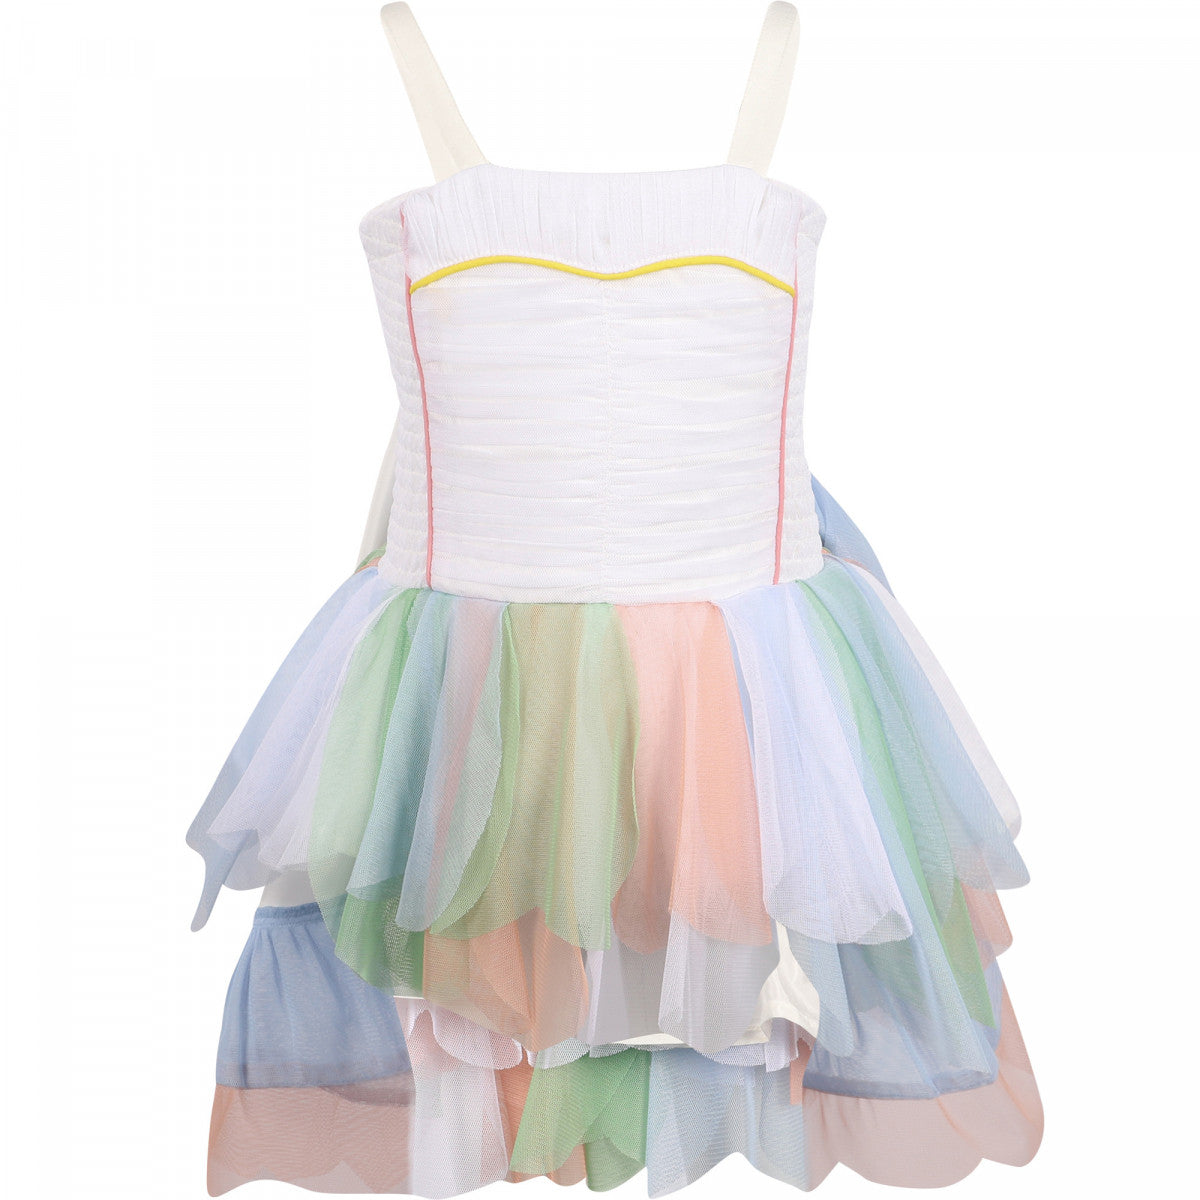 Butterfly Wings Ruffled Tulle Dress in White and Pastels